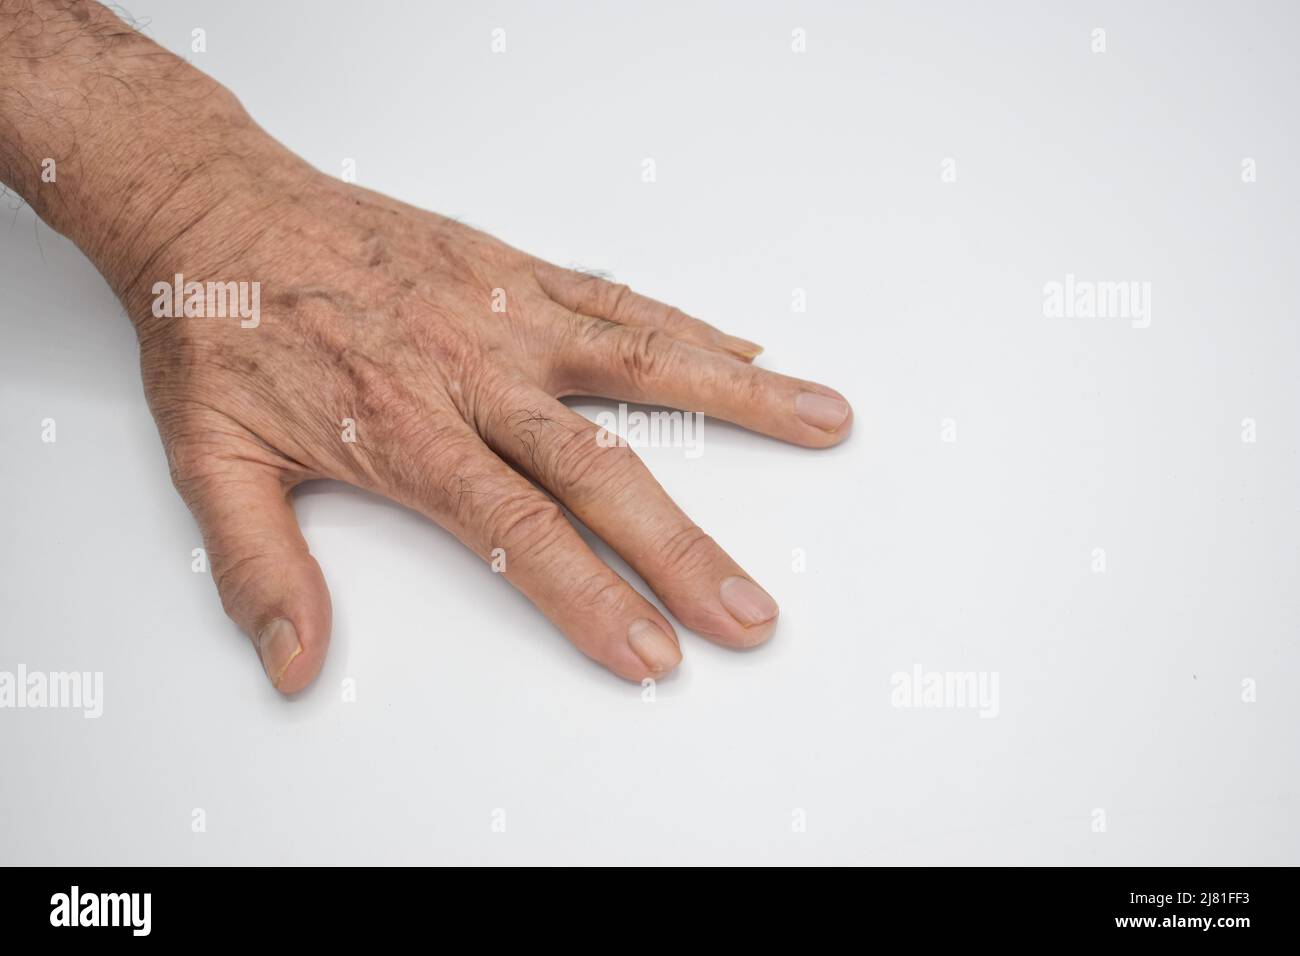 Spastic hand. Hand muscle spasticity. Concept of hand health. Stock Photo